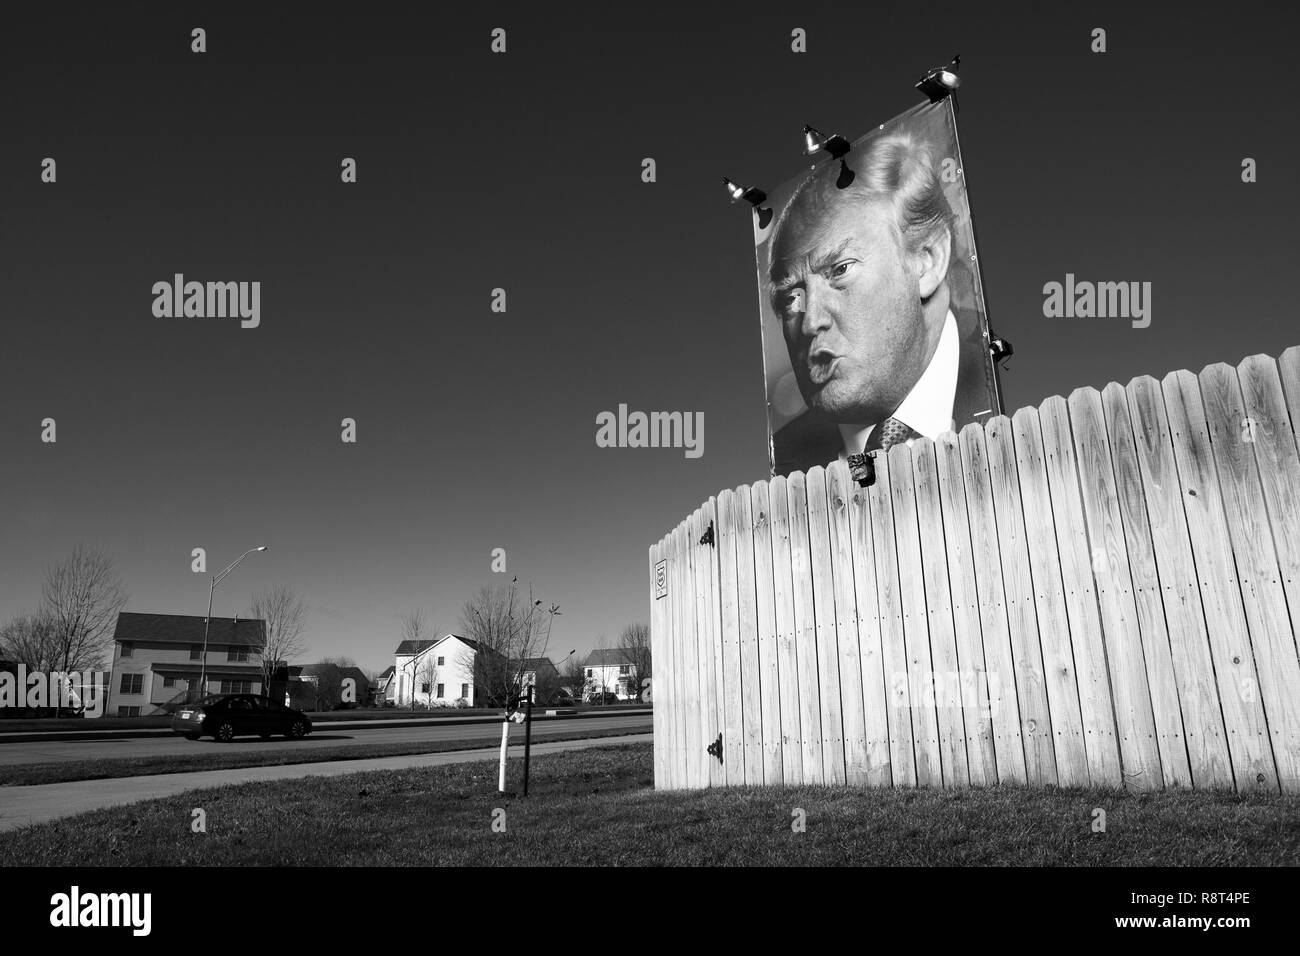 Des Moines, Iowa, United States, December 10, 2015: An ardent supporter of Donald Trump put up his own billboard at his home in West Des Moines, Iowa. Stock Photo